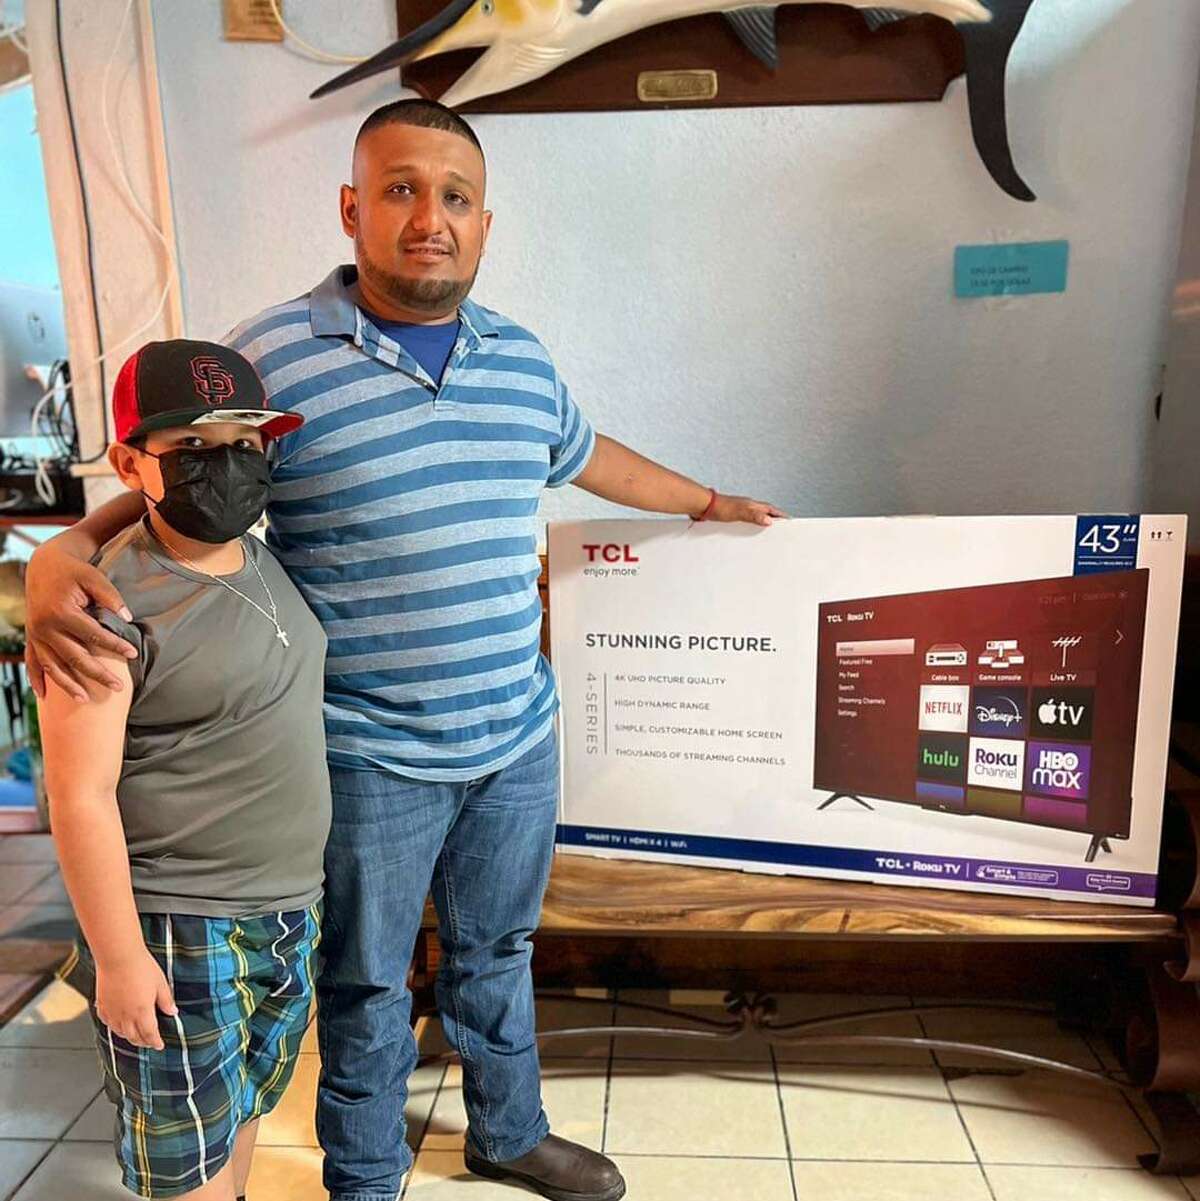 A waiter, Jose Luis Ortiz, from the Nuevo Laredoan restaurant, Pescados y Mariscos Beto’s, was awarded with a large television screen for his good work ethic on the job as he gave back extra money that a customer paid for his order at the restaurant. 